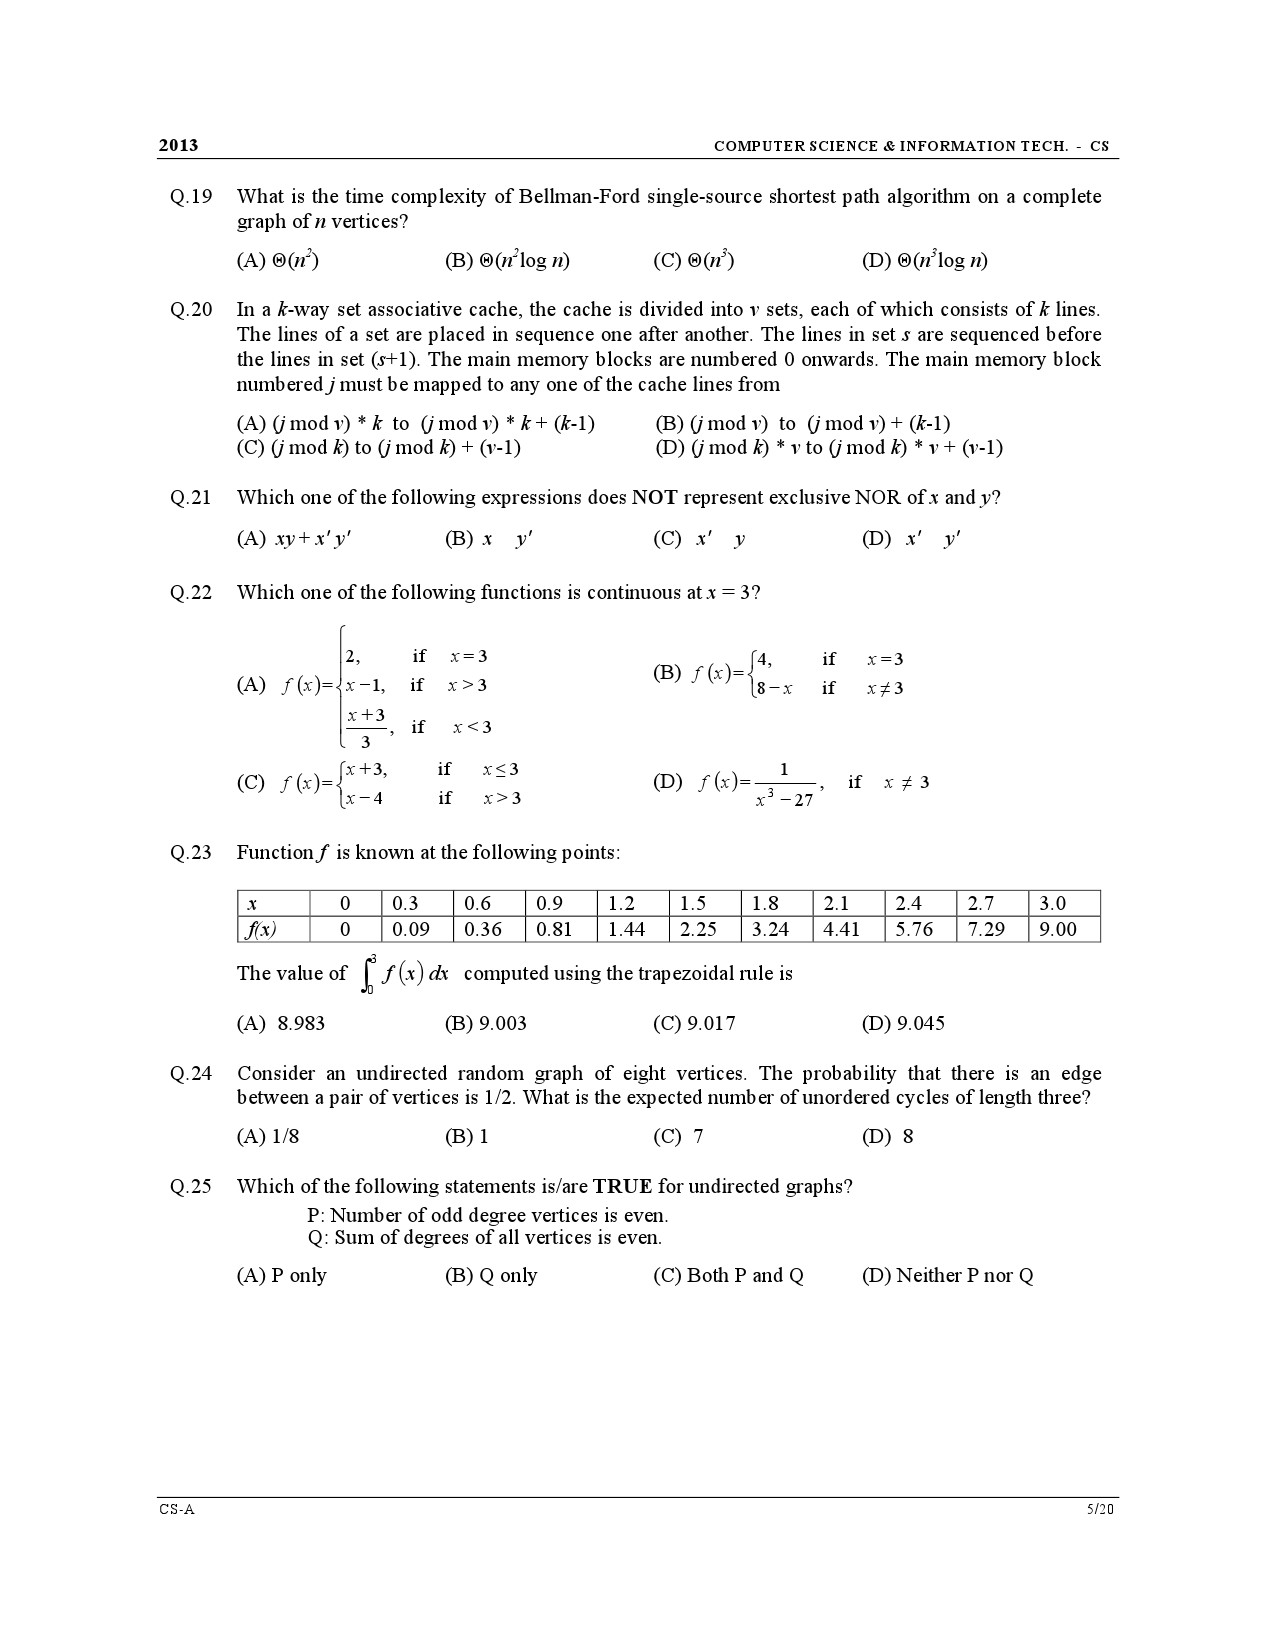 GATE Exam Question Paper 2013 Computer Science and Information Technology 5